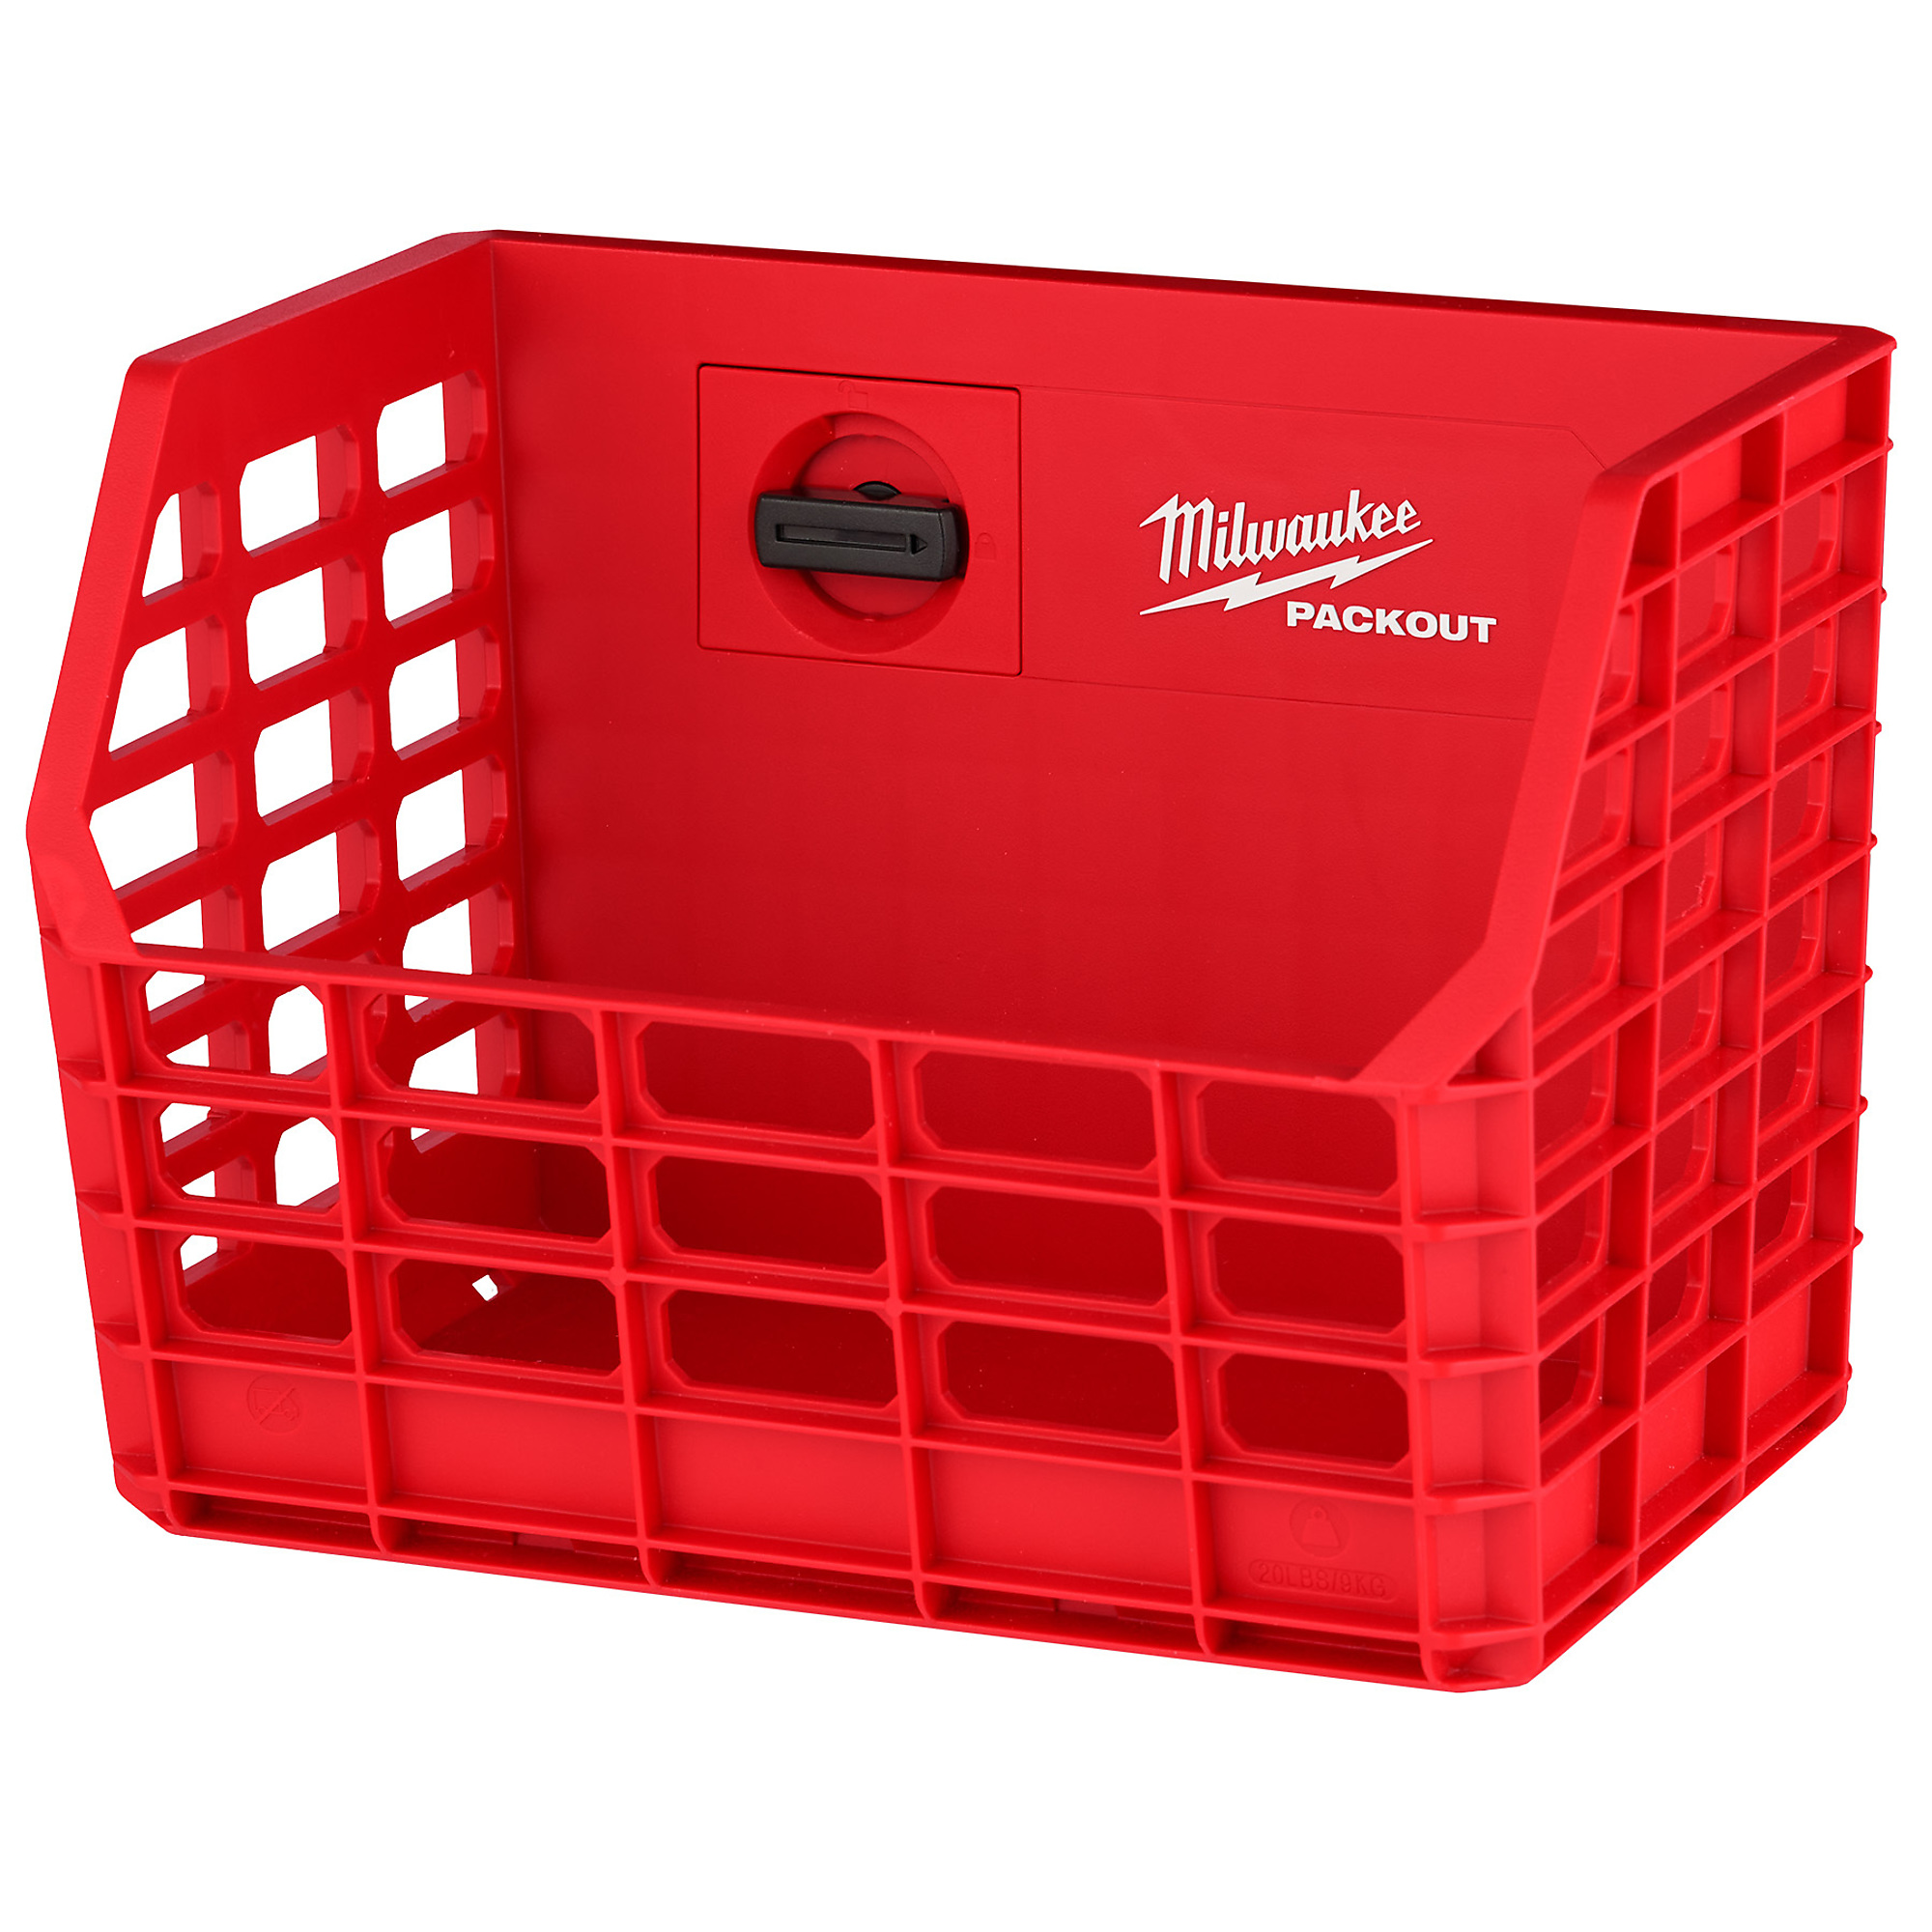 Milwaukee, PACKOUT Compact Wall Basket, Model 48-22-8342